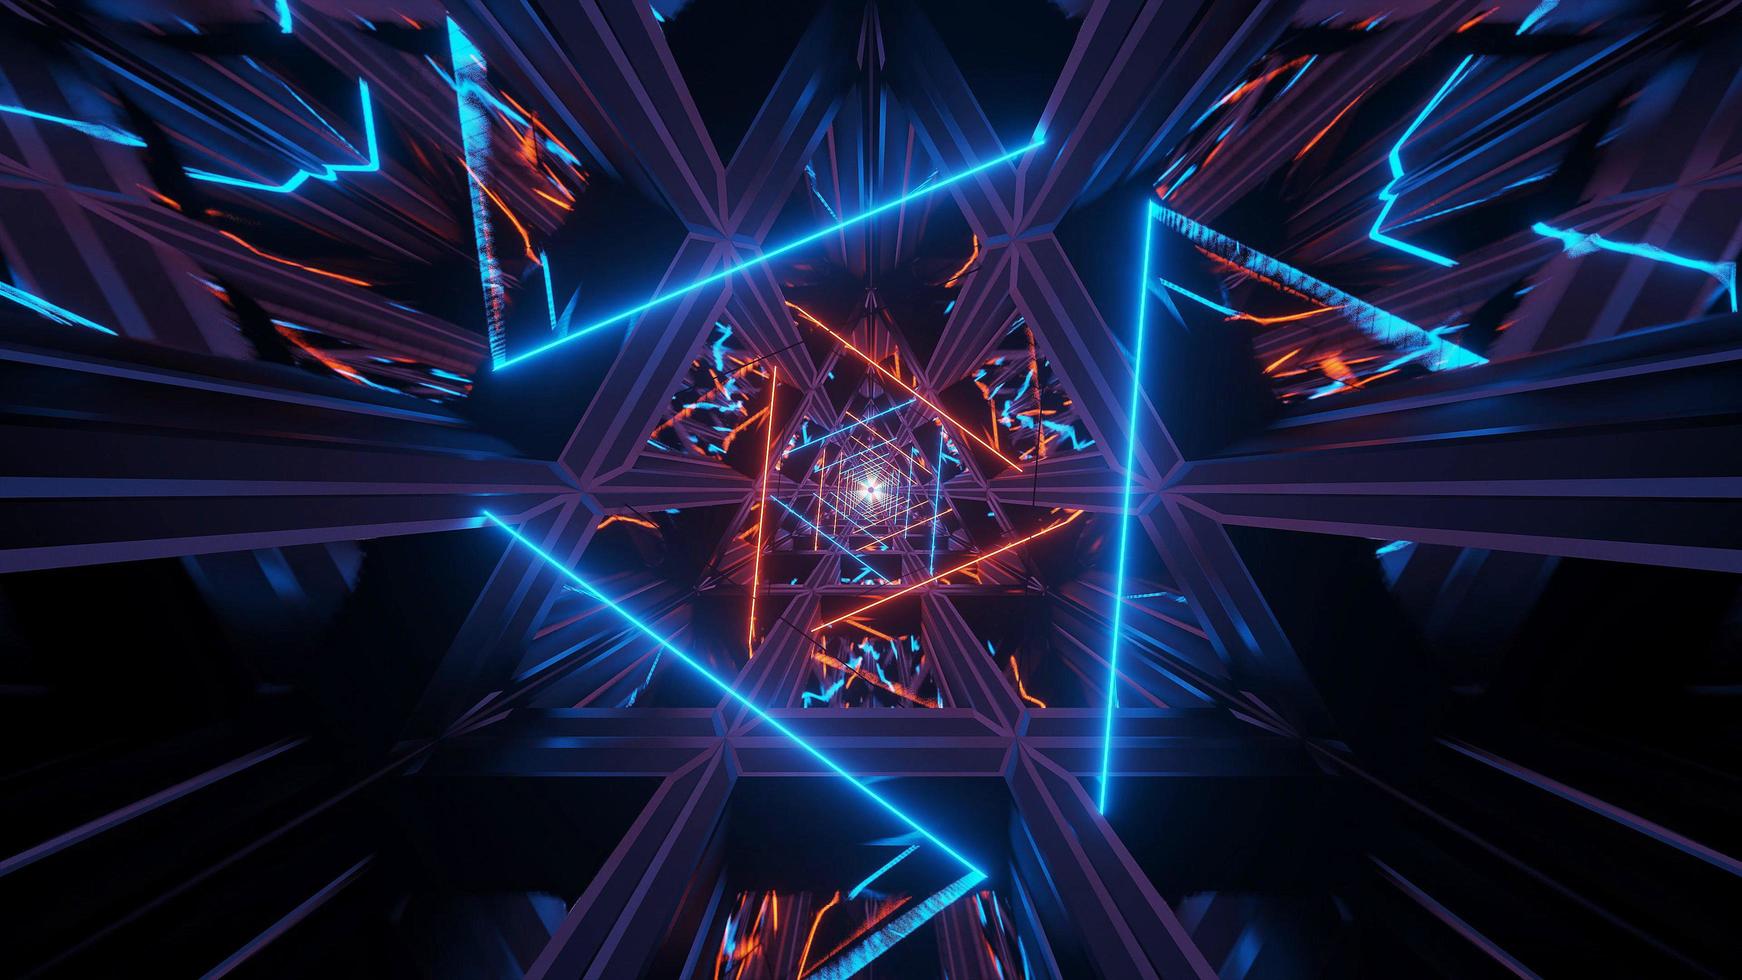 4k uhd illustrated space triangles photo